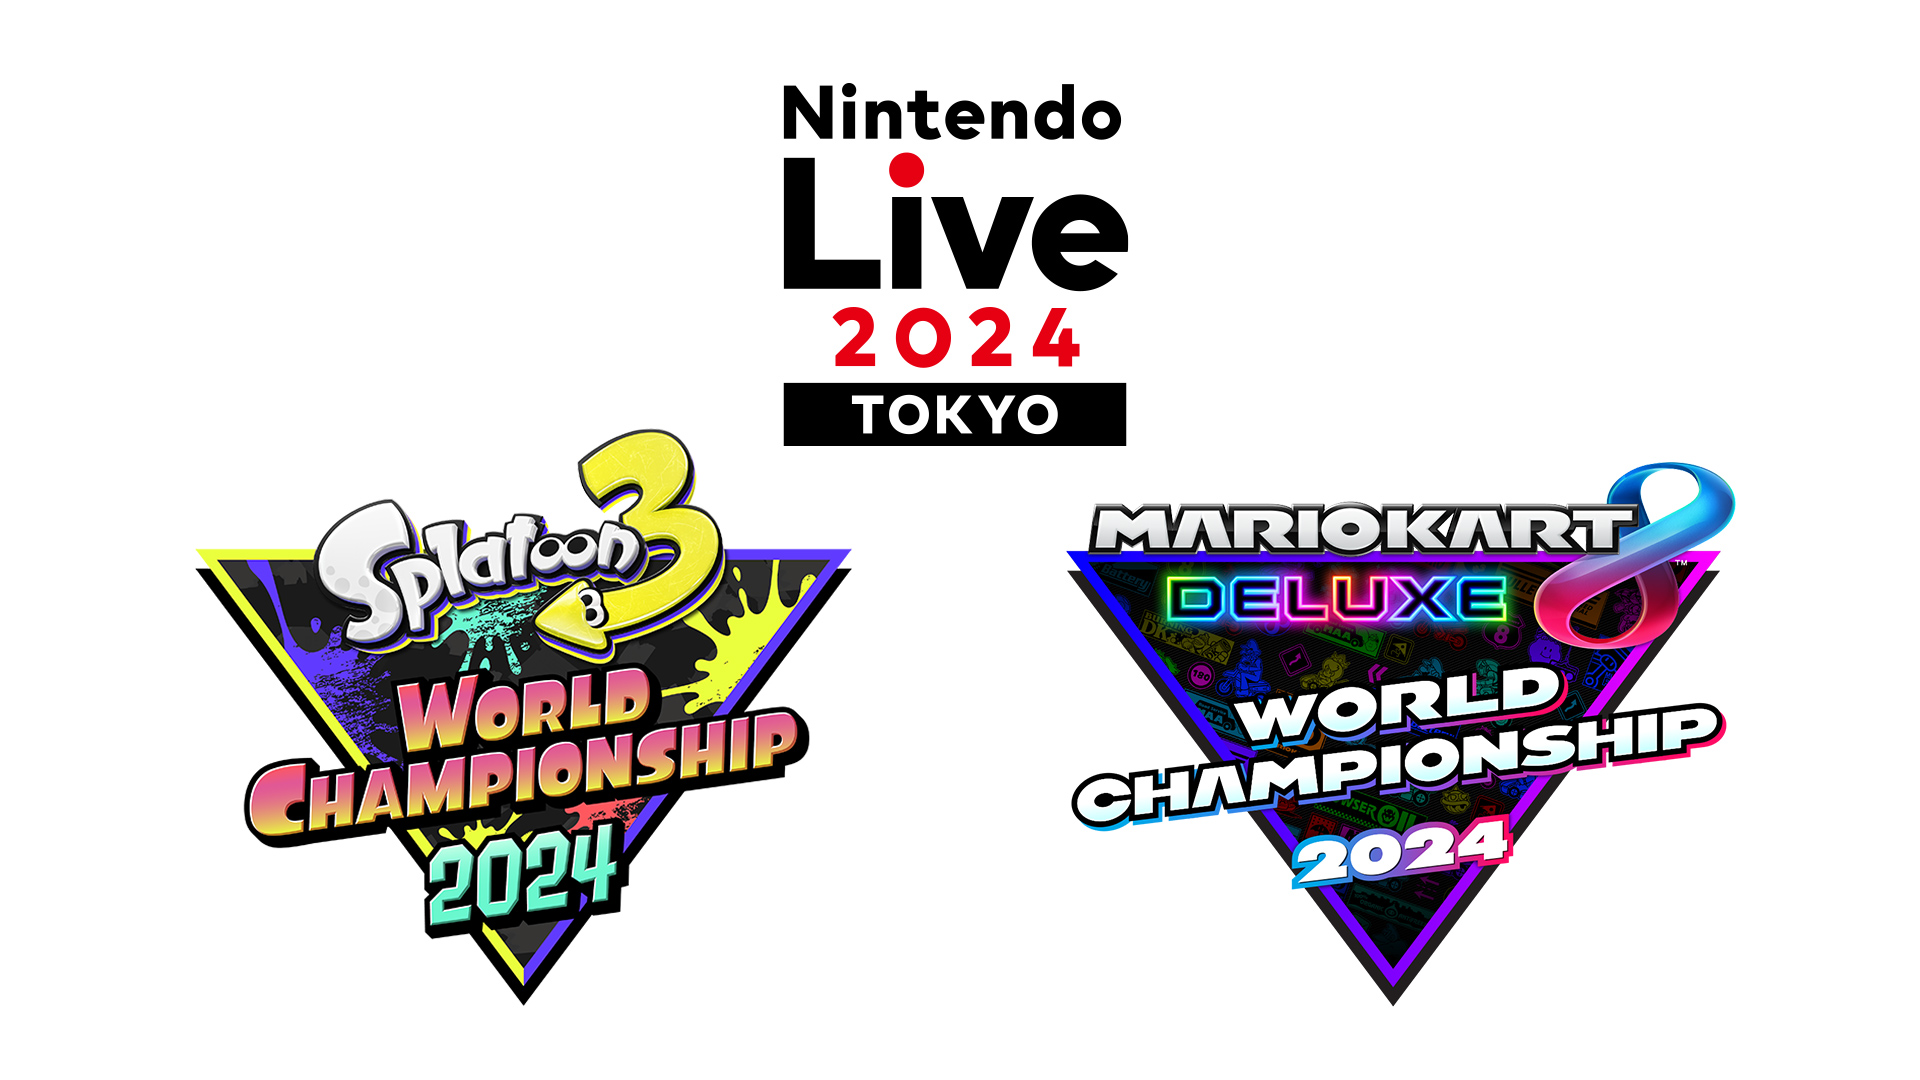 Nintendo Live canceled due to threats against staff and fans Desk